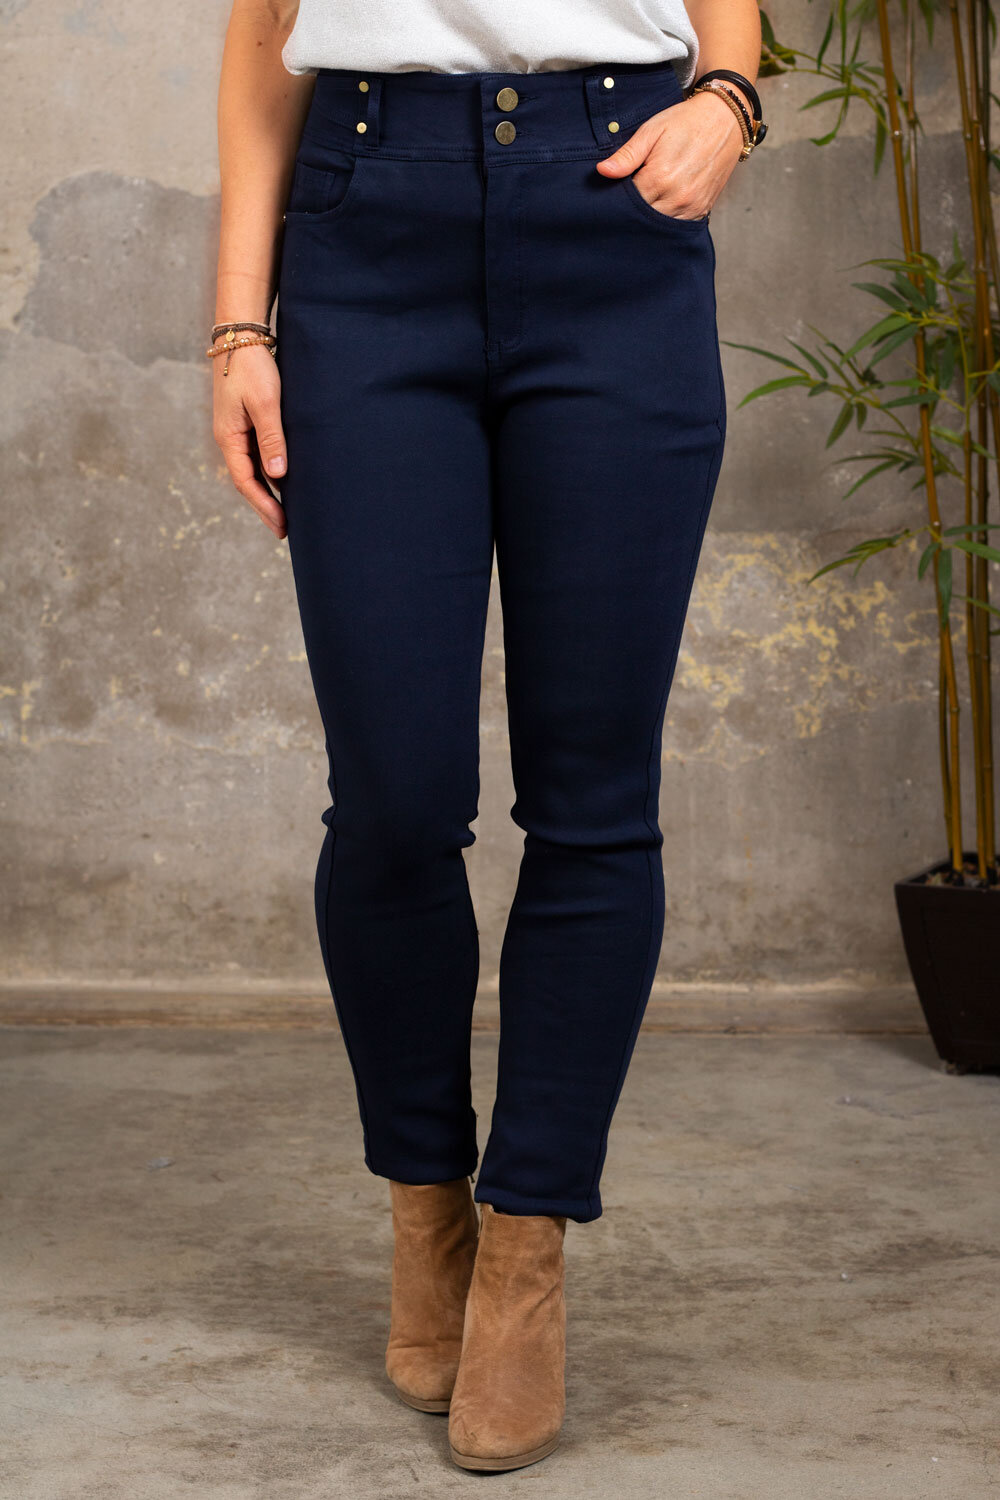 Trousers with Gold Details - NL83045 - Navy